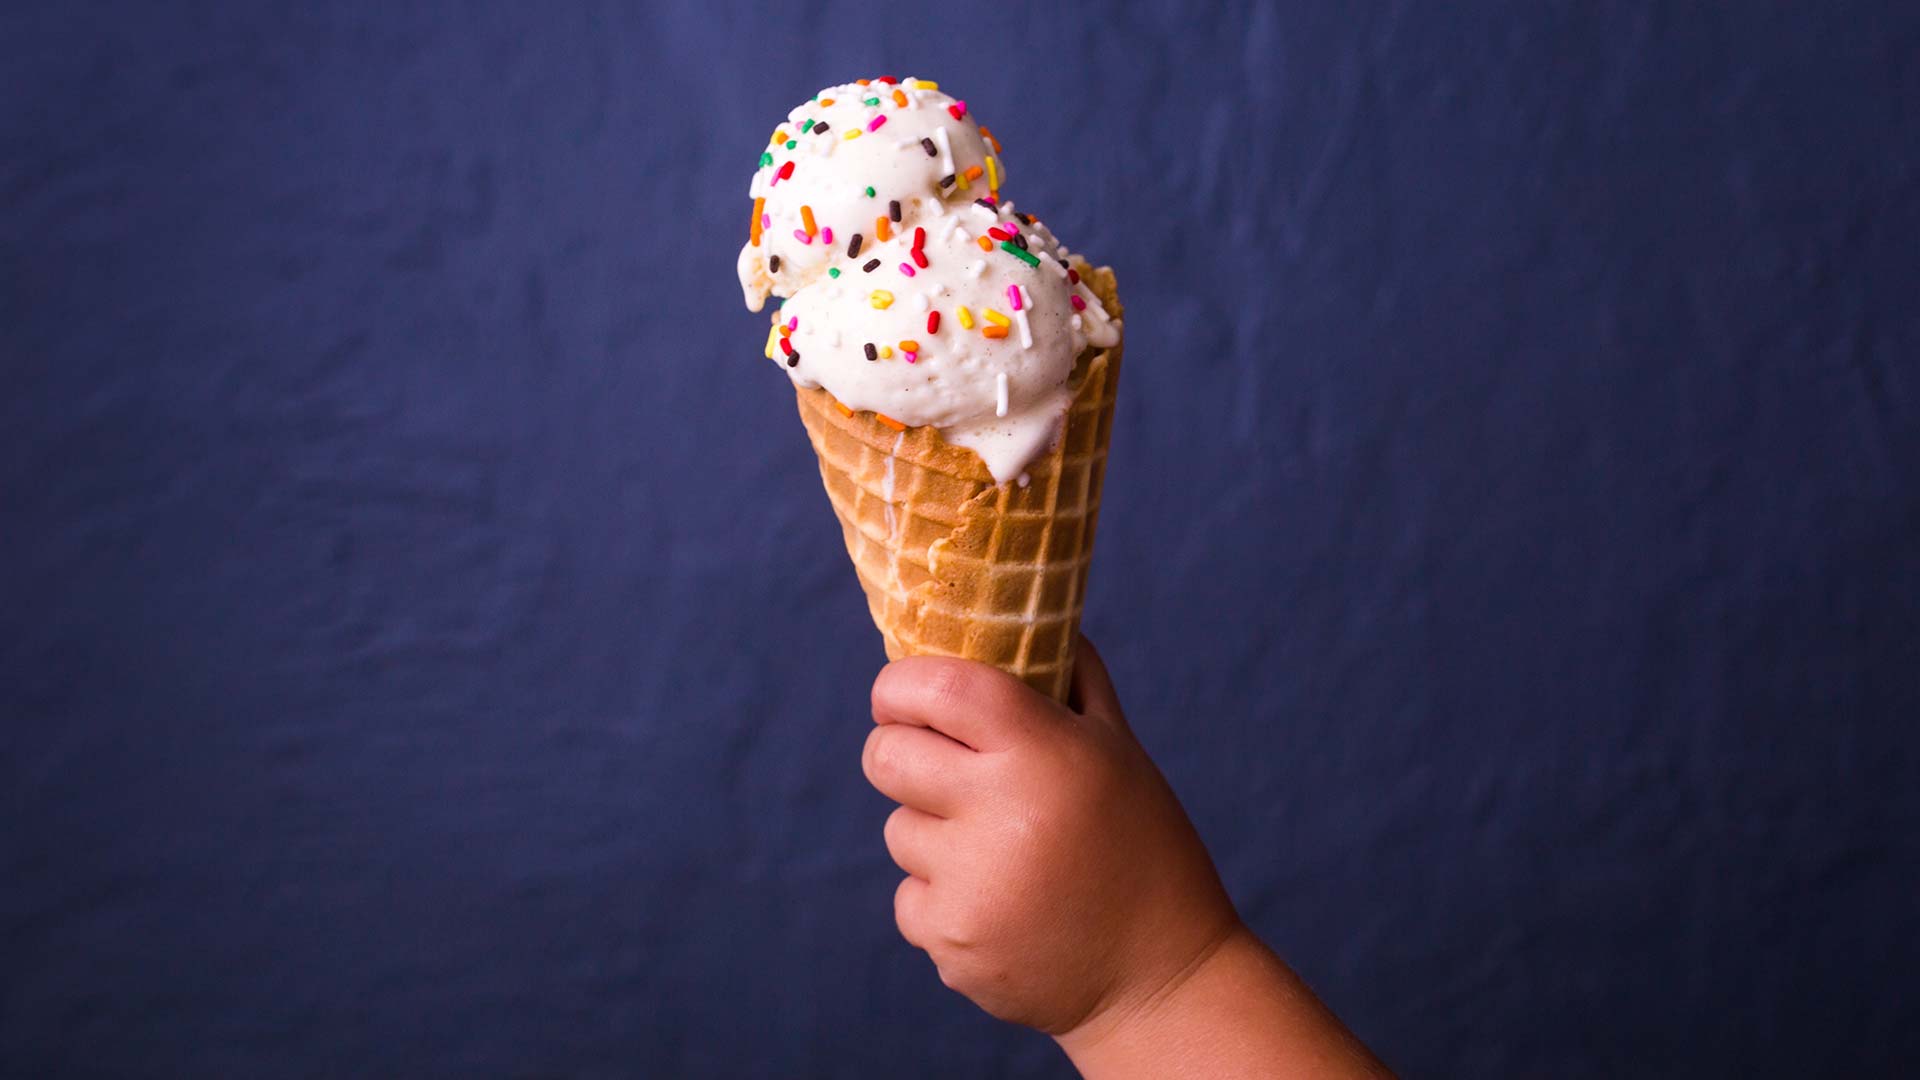 Sugar in Our Kids' Diets—Treat or Temptation